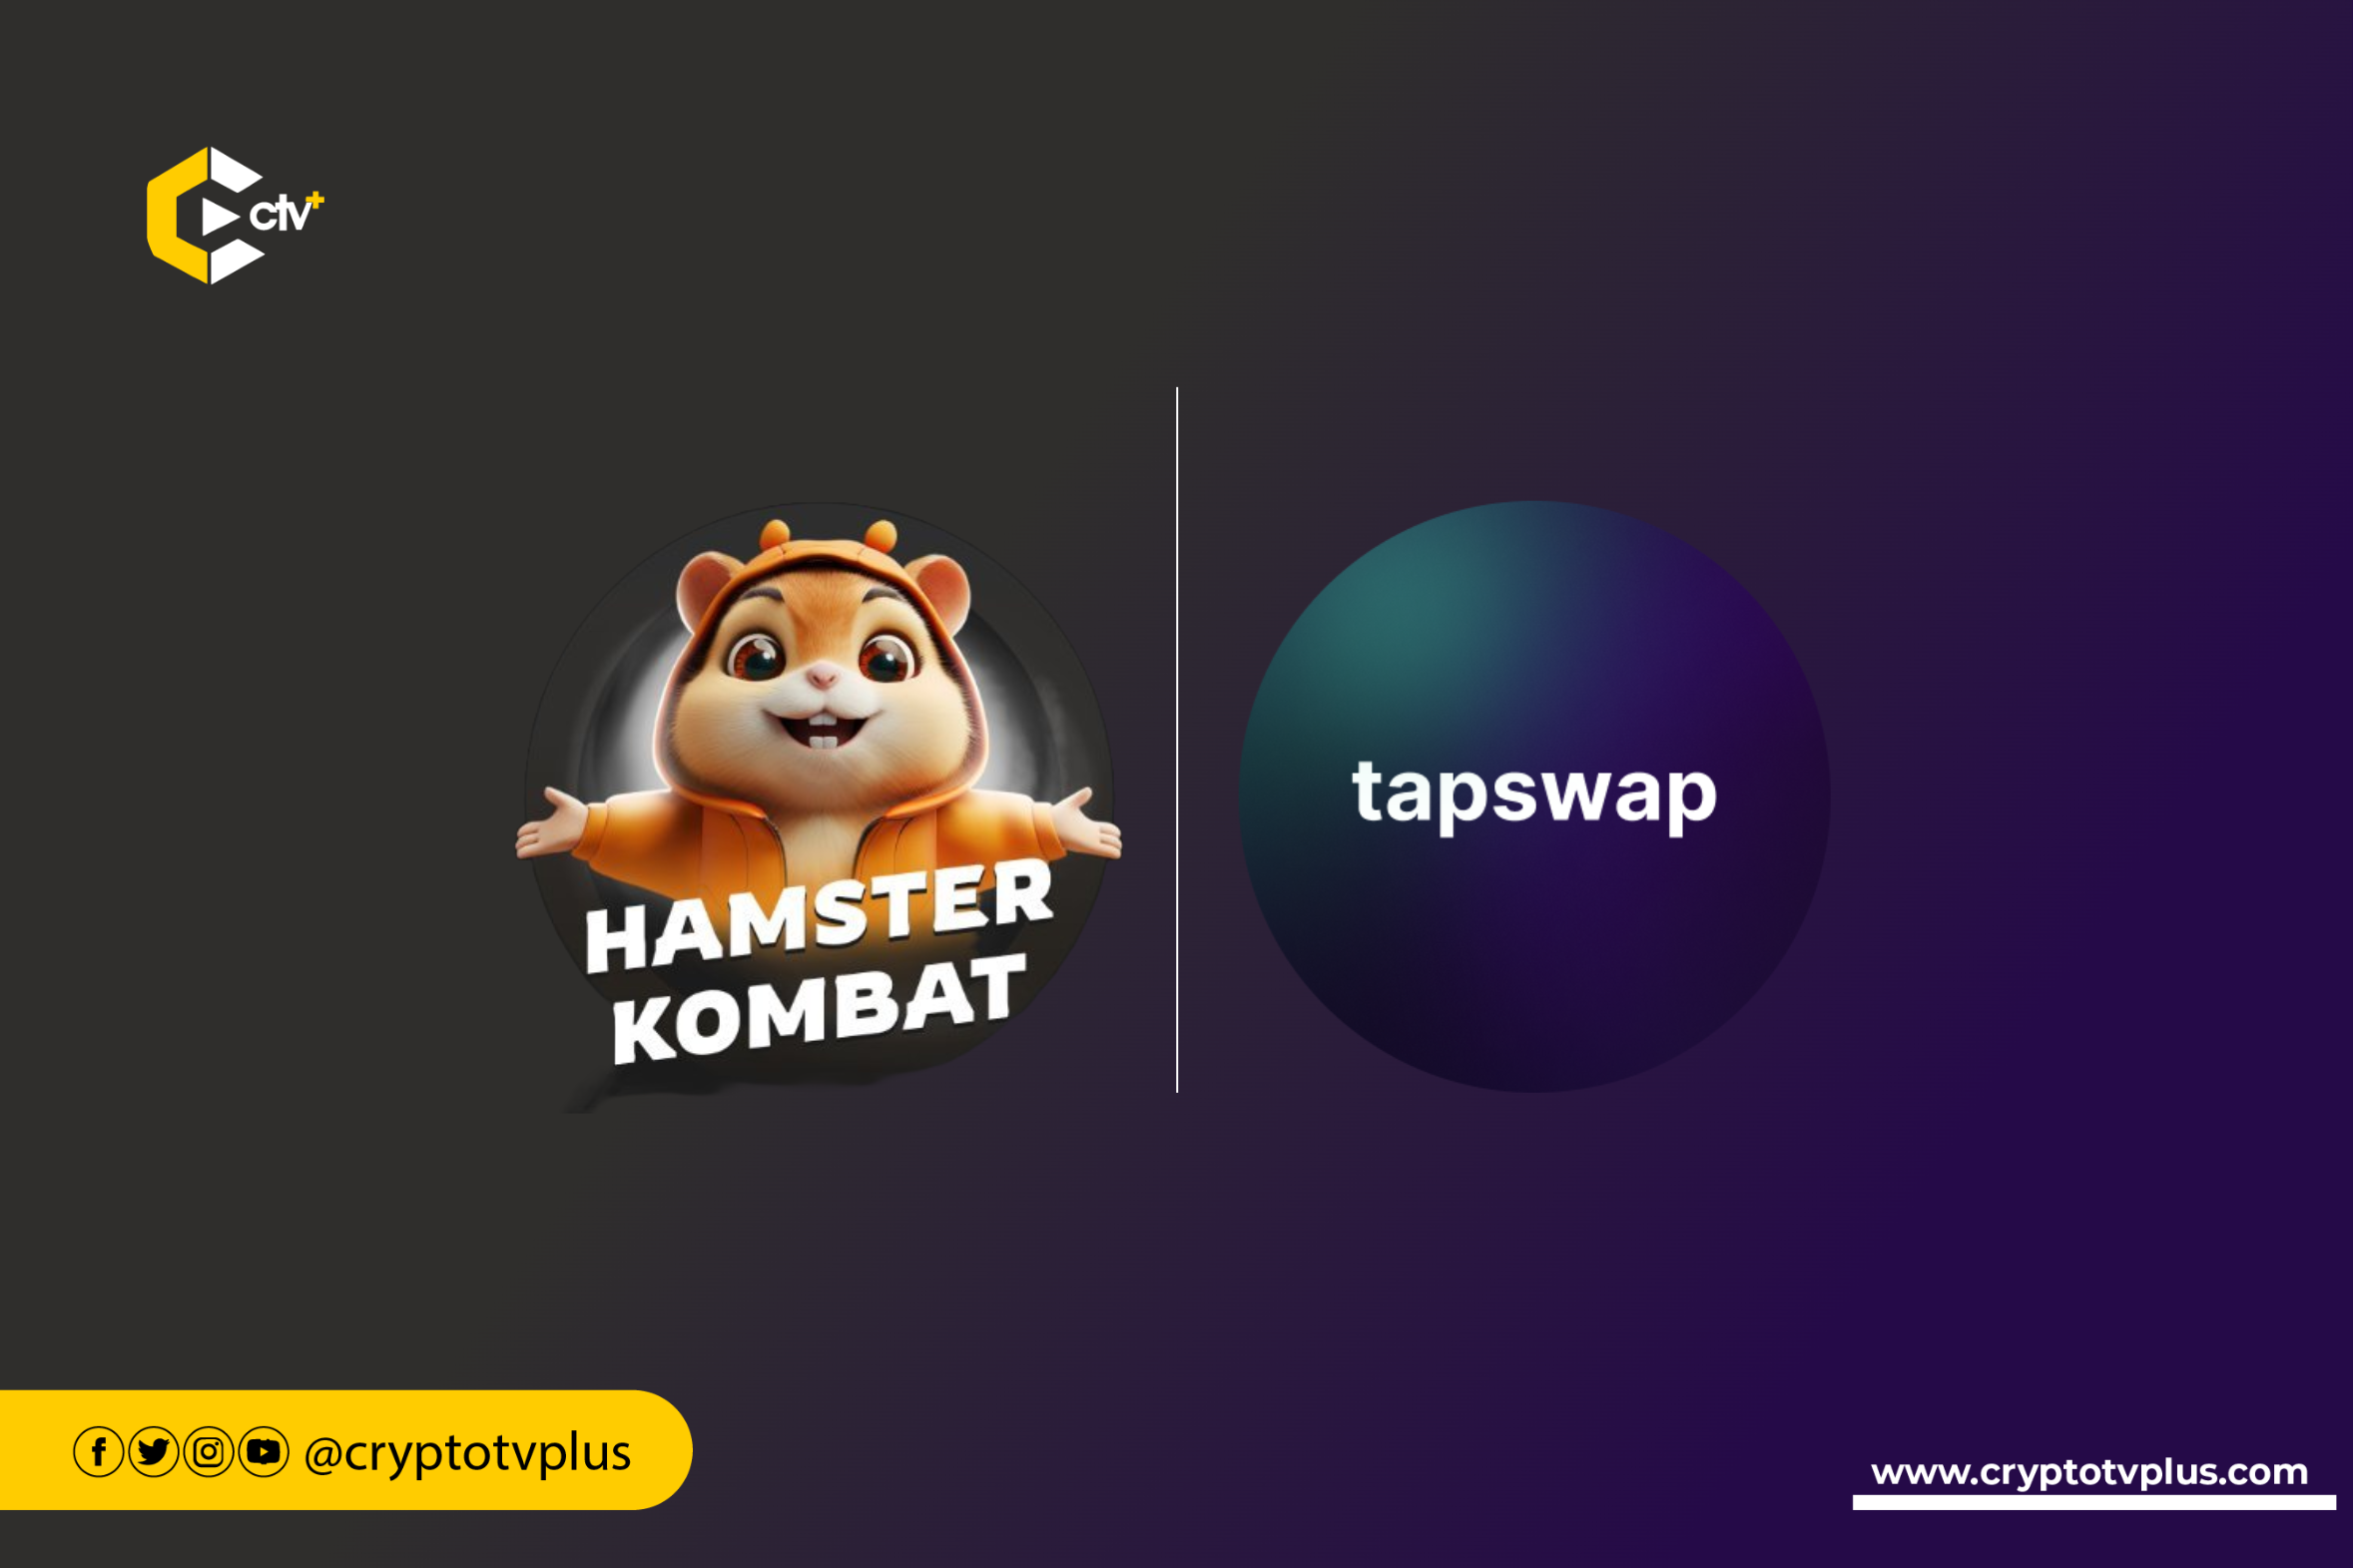 A comprehensive comparison of Tapswap and Hamster Kombat on the TON blockchain: key features, benefits, and what you need to know before.